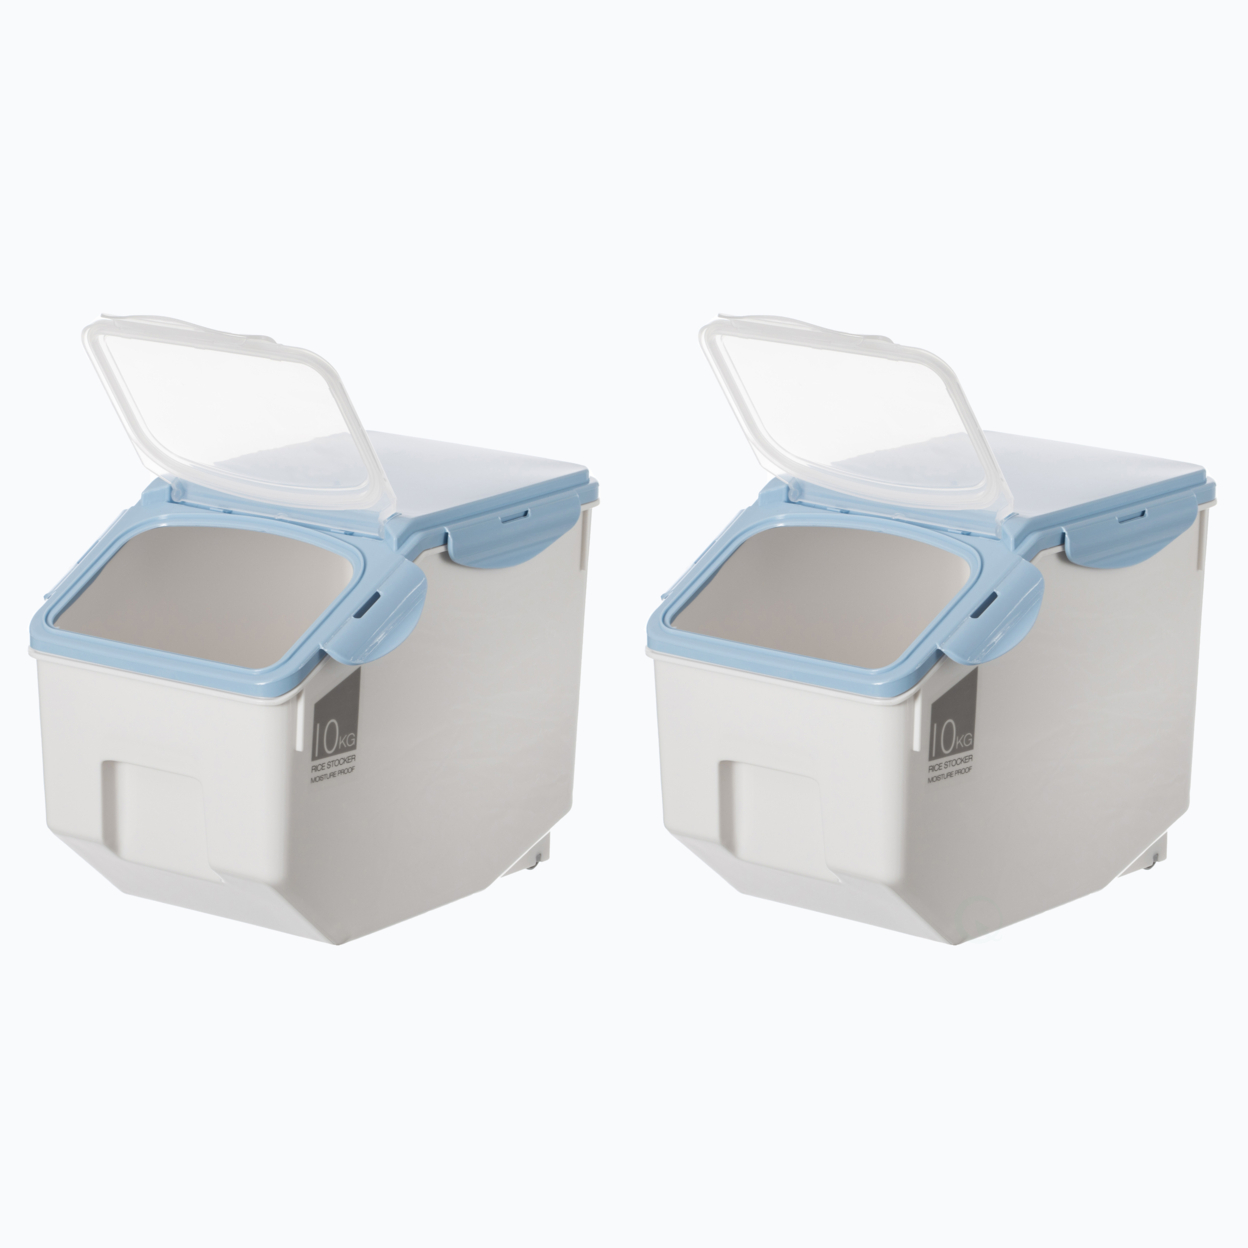 Set Of 2 White Plastic Storage Food Holder Containers, With A Measuring Cup And Wheels - Medium